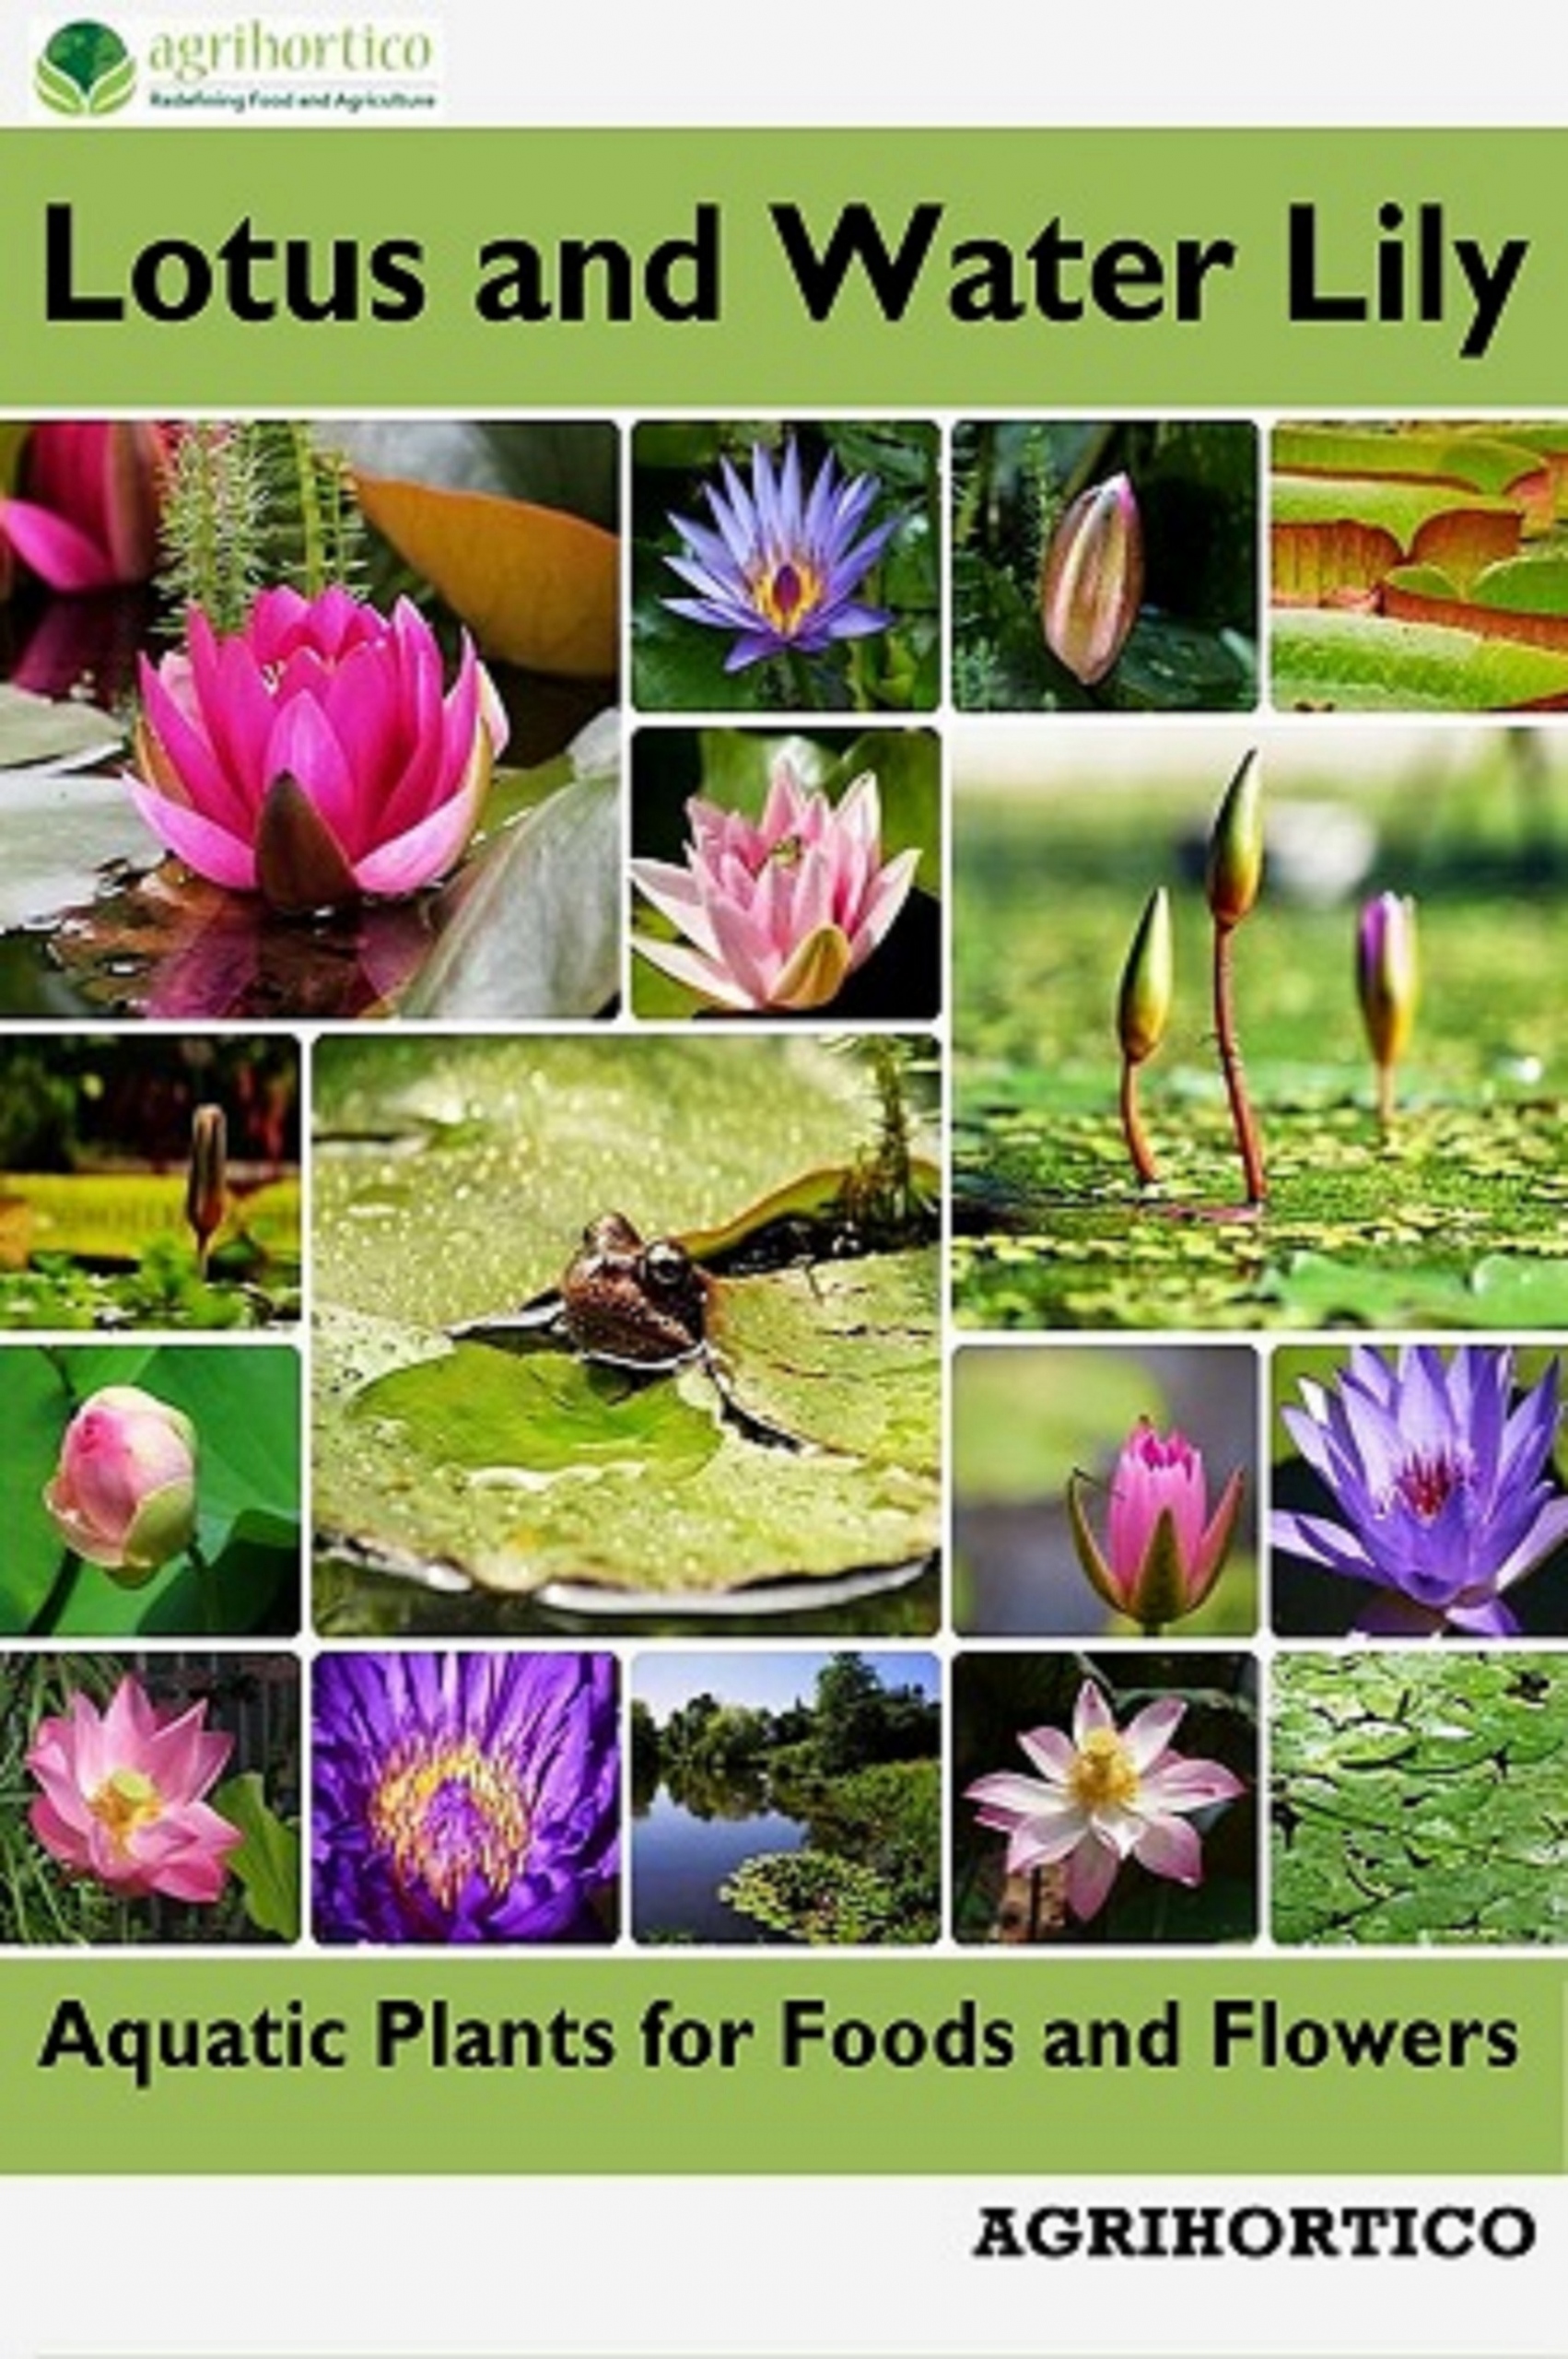 Lotus and Water Lily